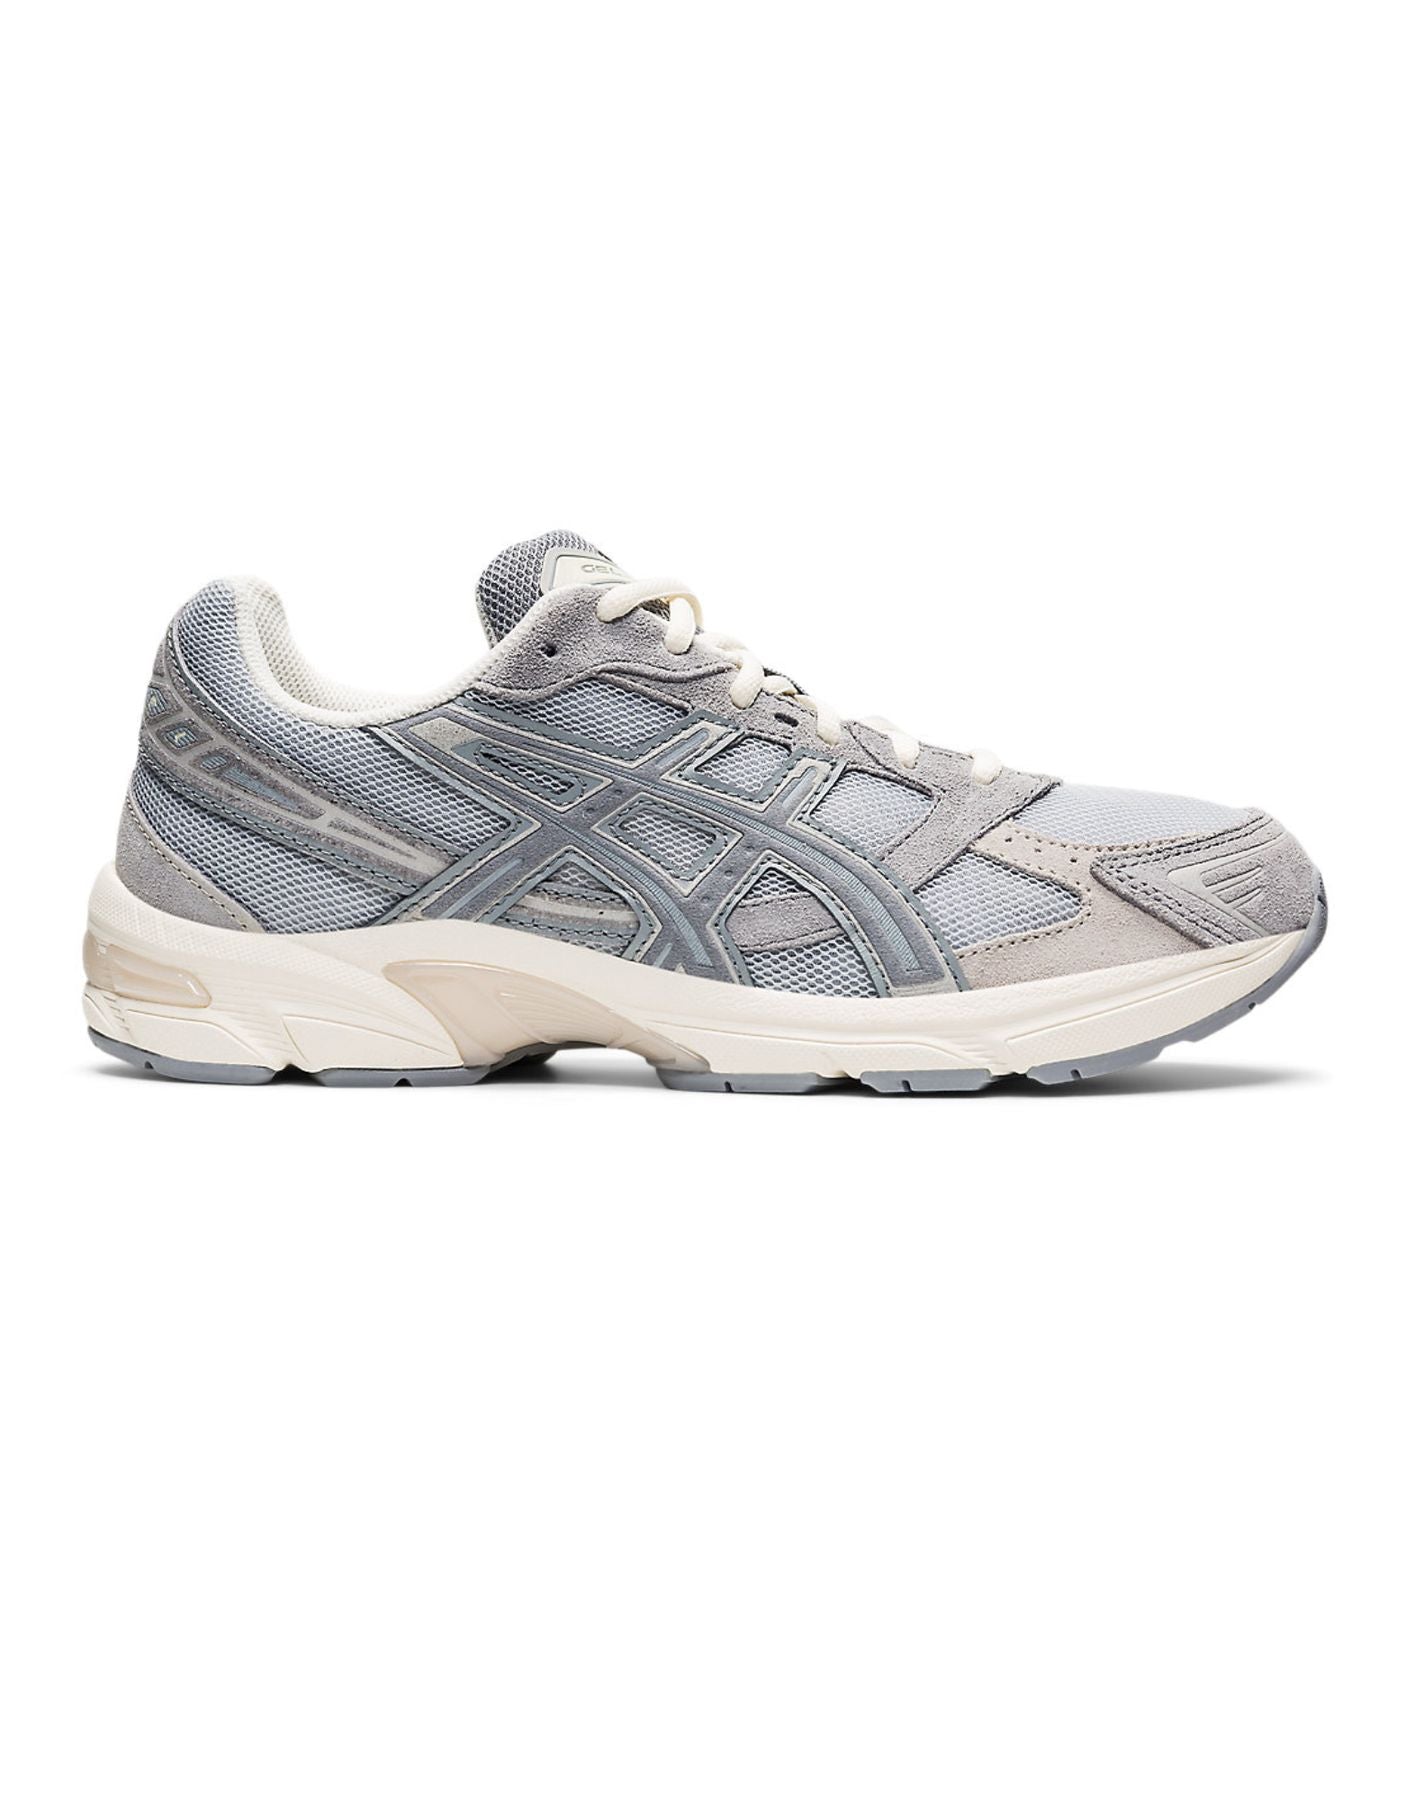 Shoes for man 1201A255-022 M ASICS